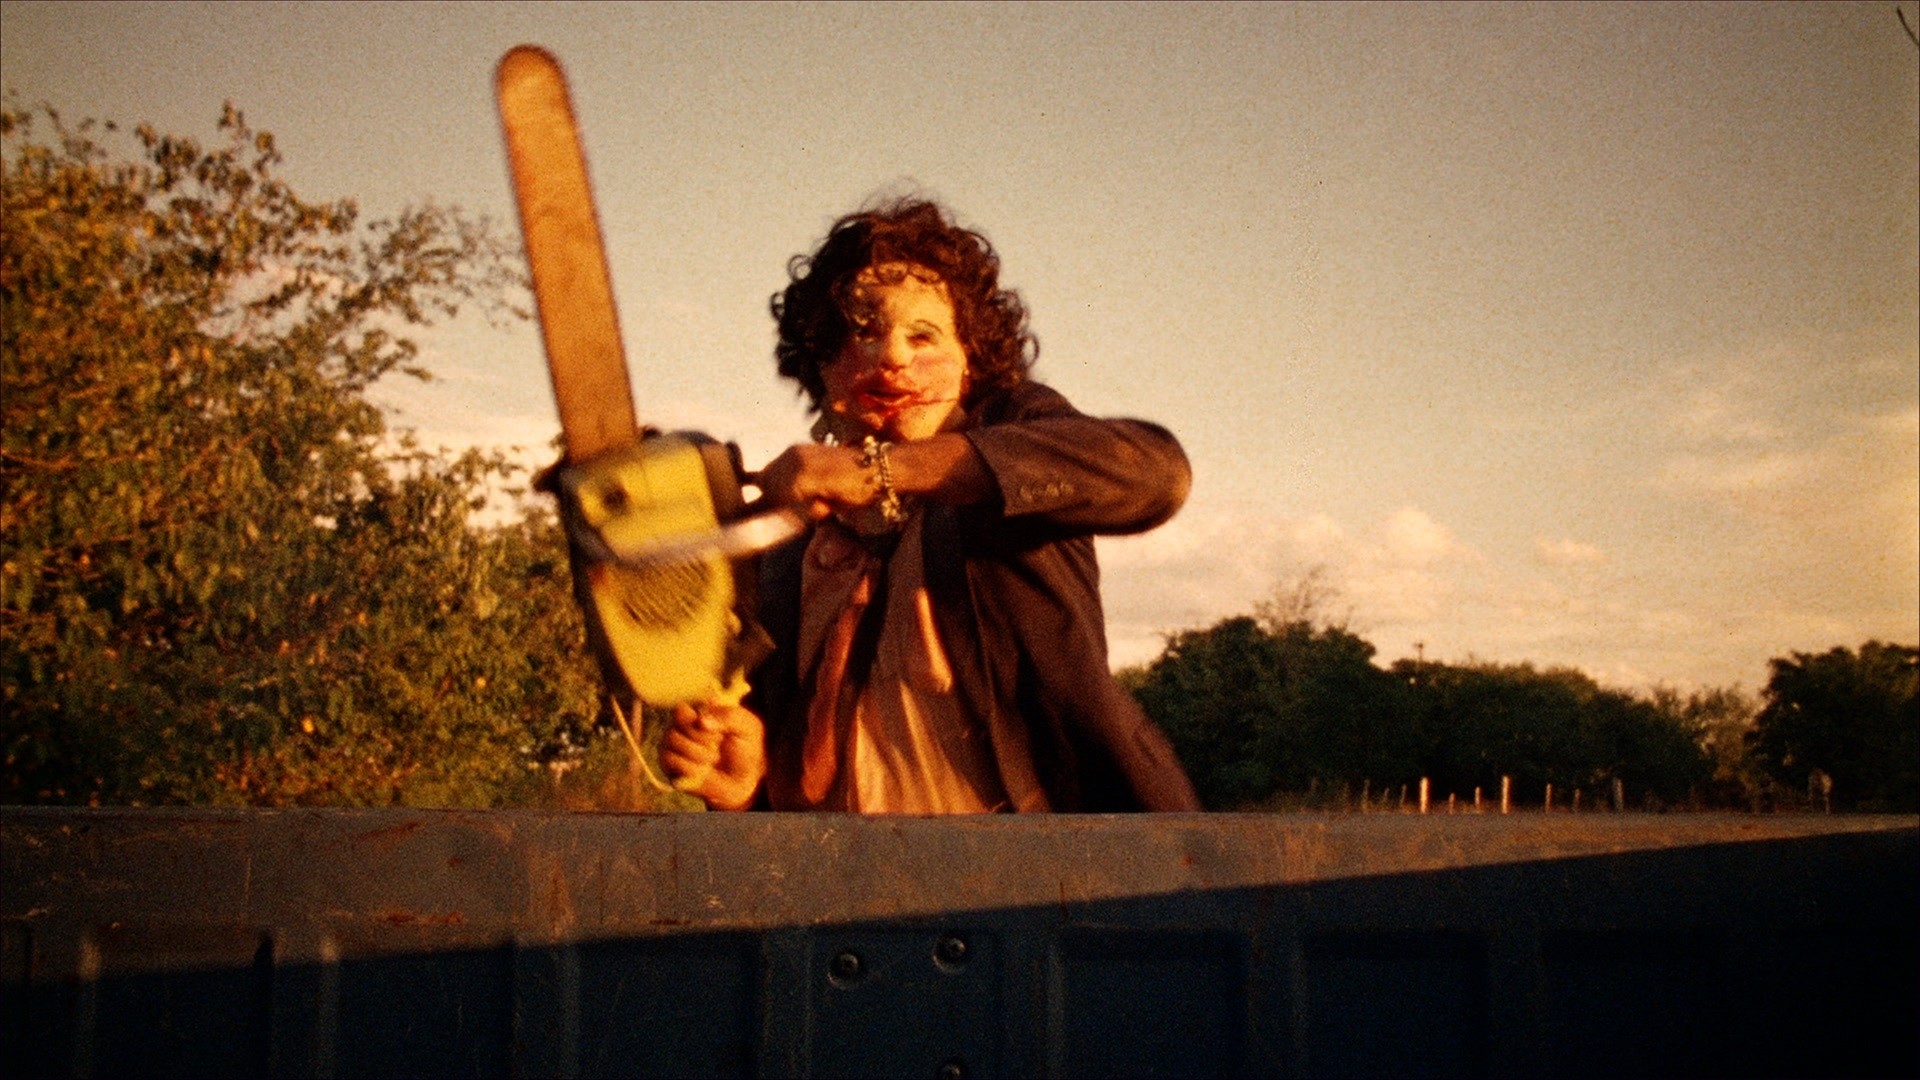 Leatherface Wallpaper, A wallpaper of Leatherface from The Texas Chain Saw Massacre